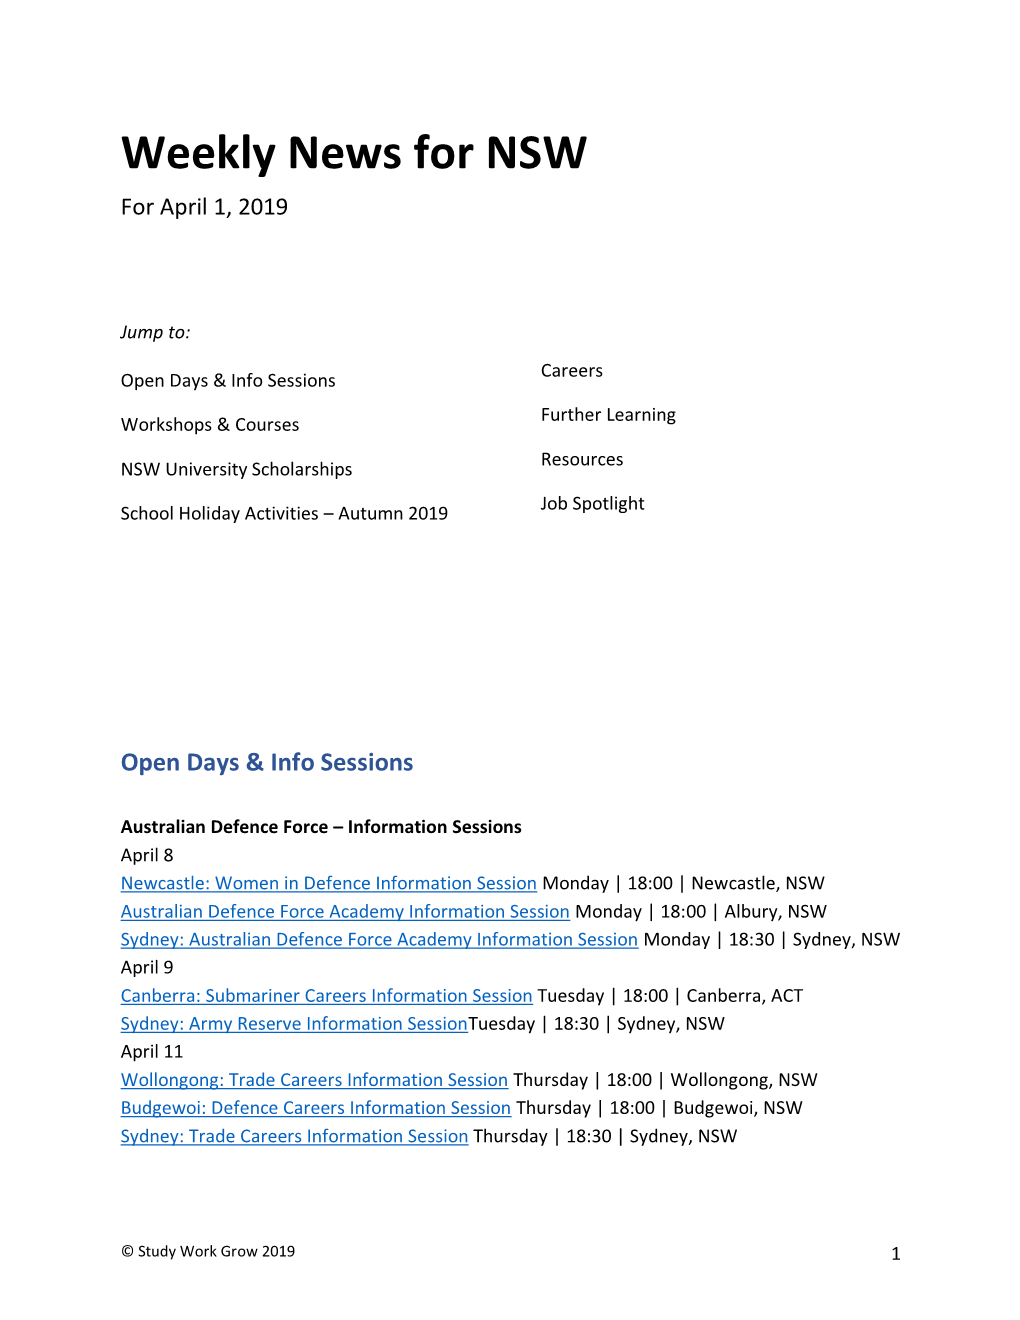 Weekly News for NSW for April 1, 2019